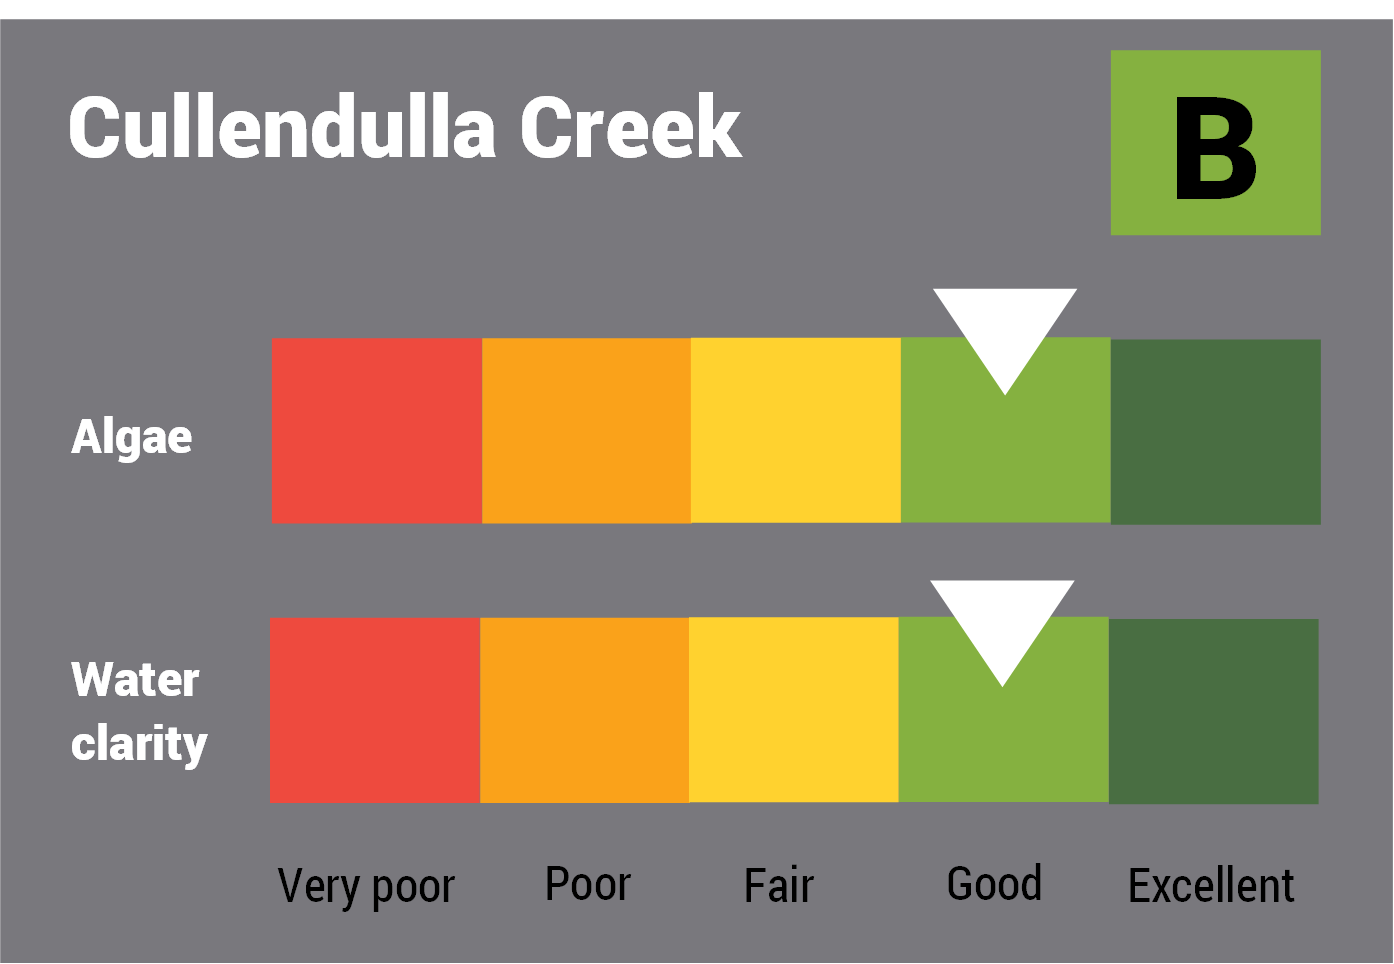 Cullendulla Creek water quality report card for algae and water clarity showing colour-coded ratings (red, orange, yellow, light green and dark green, which represent very poor, poor, fair, good and excellent, respectively). Algae is rated 'good' and water clarity is rated 'good' giving an overall rating of 'good' or 'B'.